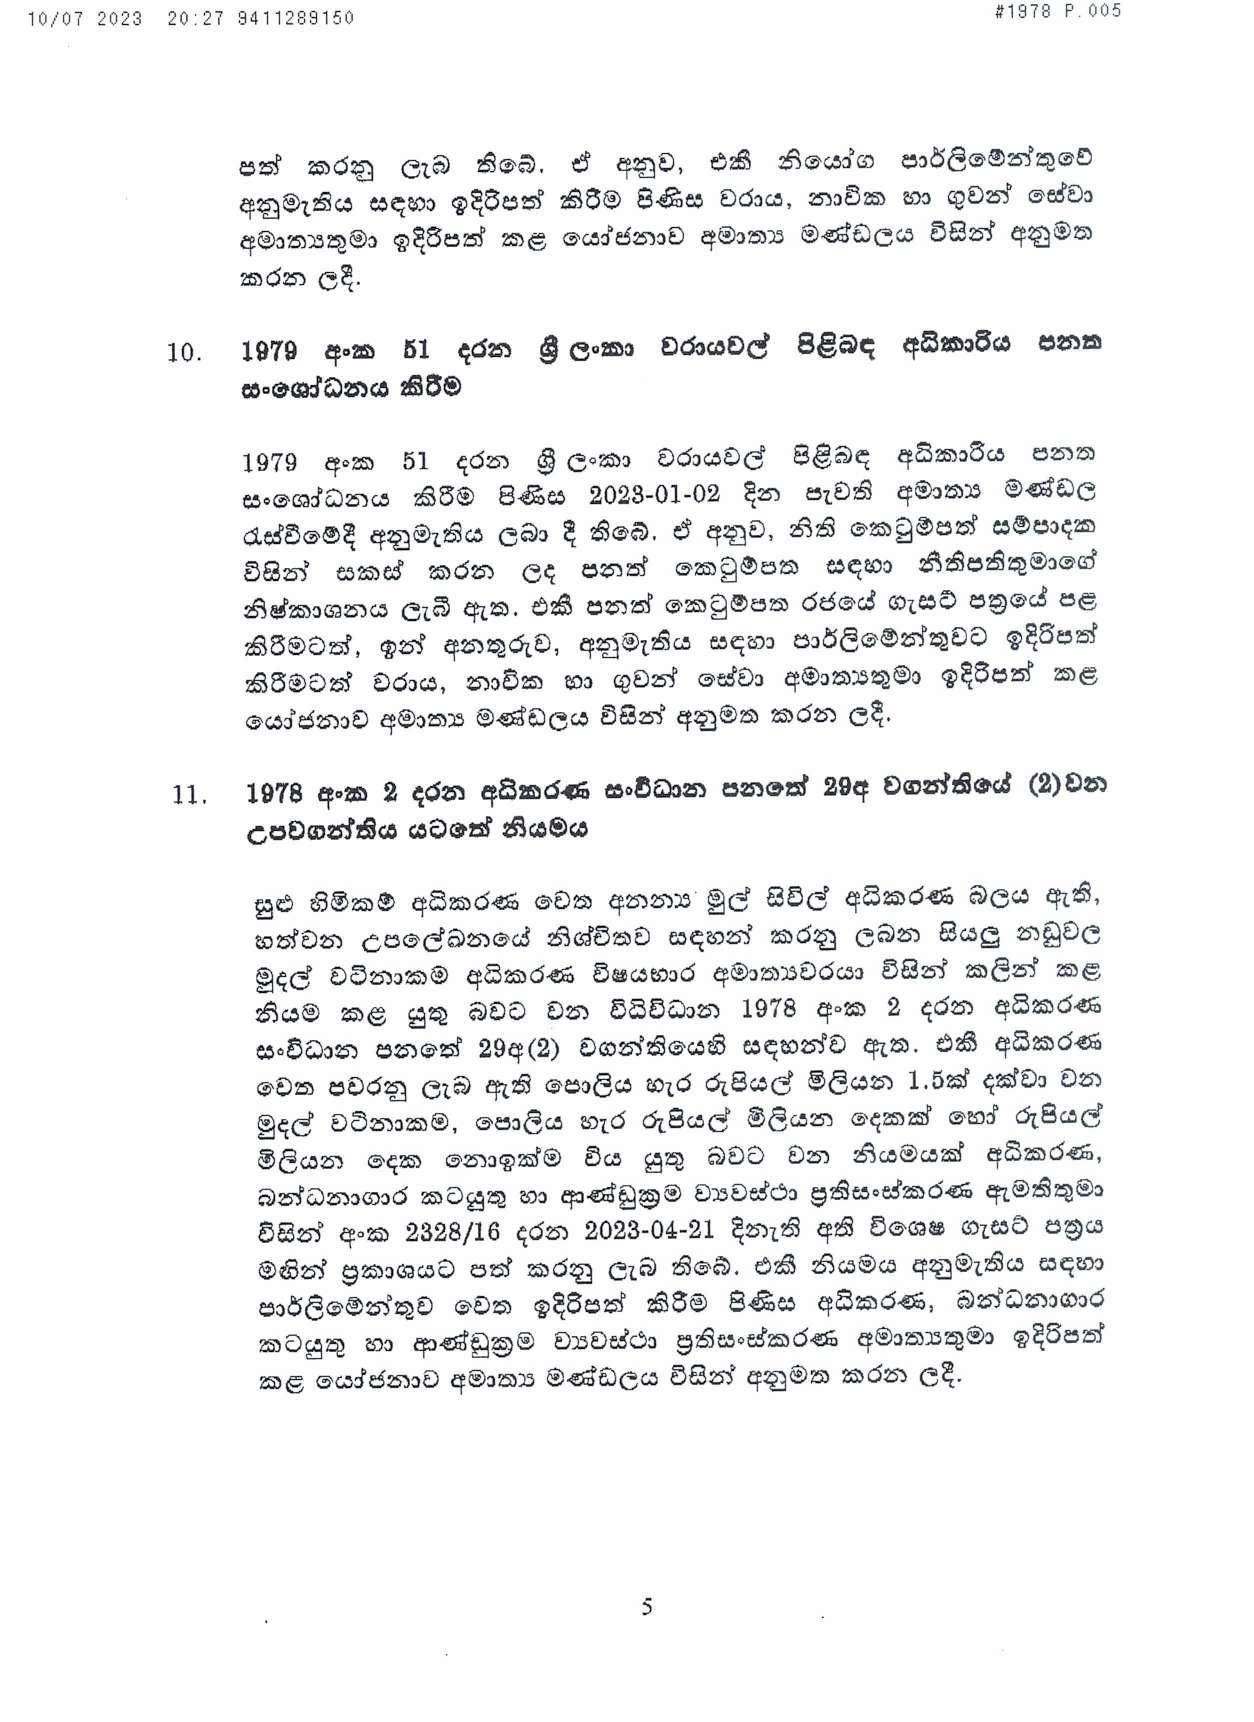 Cabinet Decision on 10.07.2023d page 005